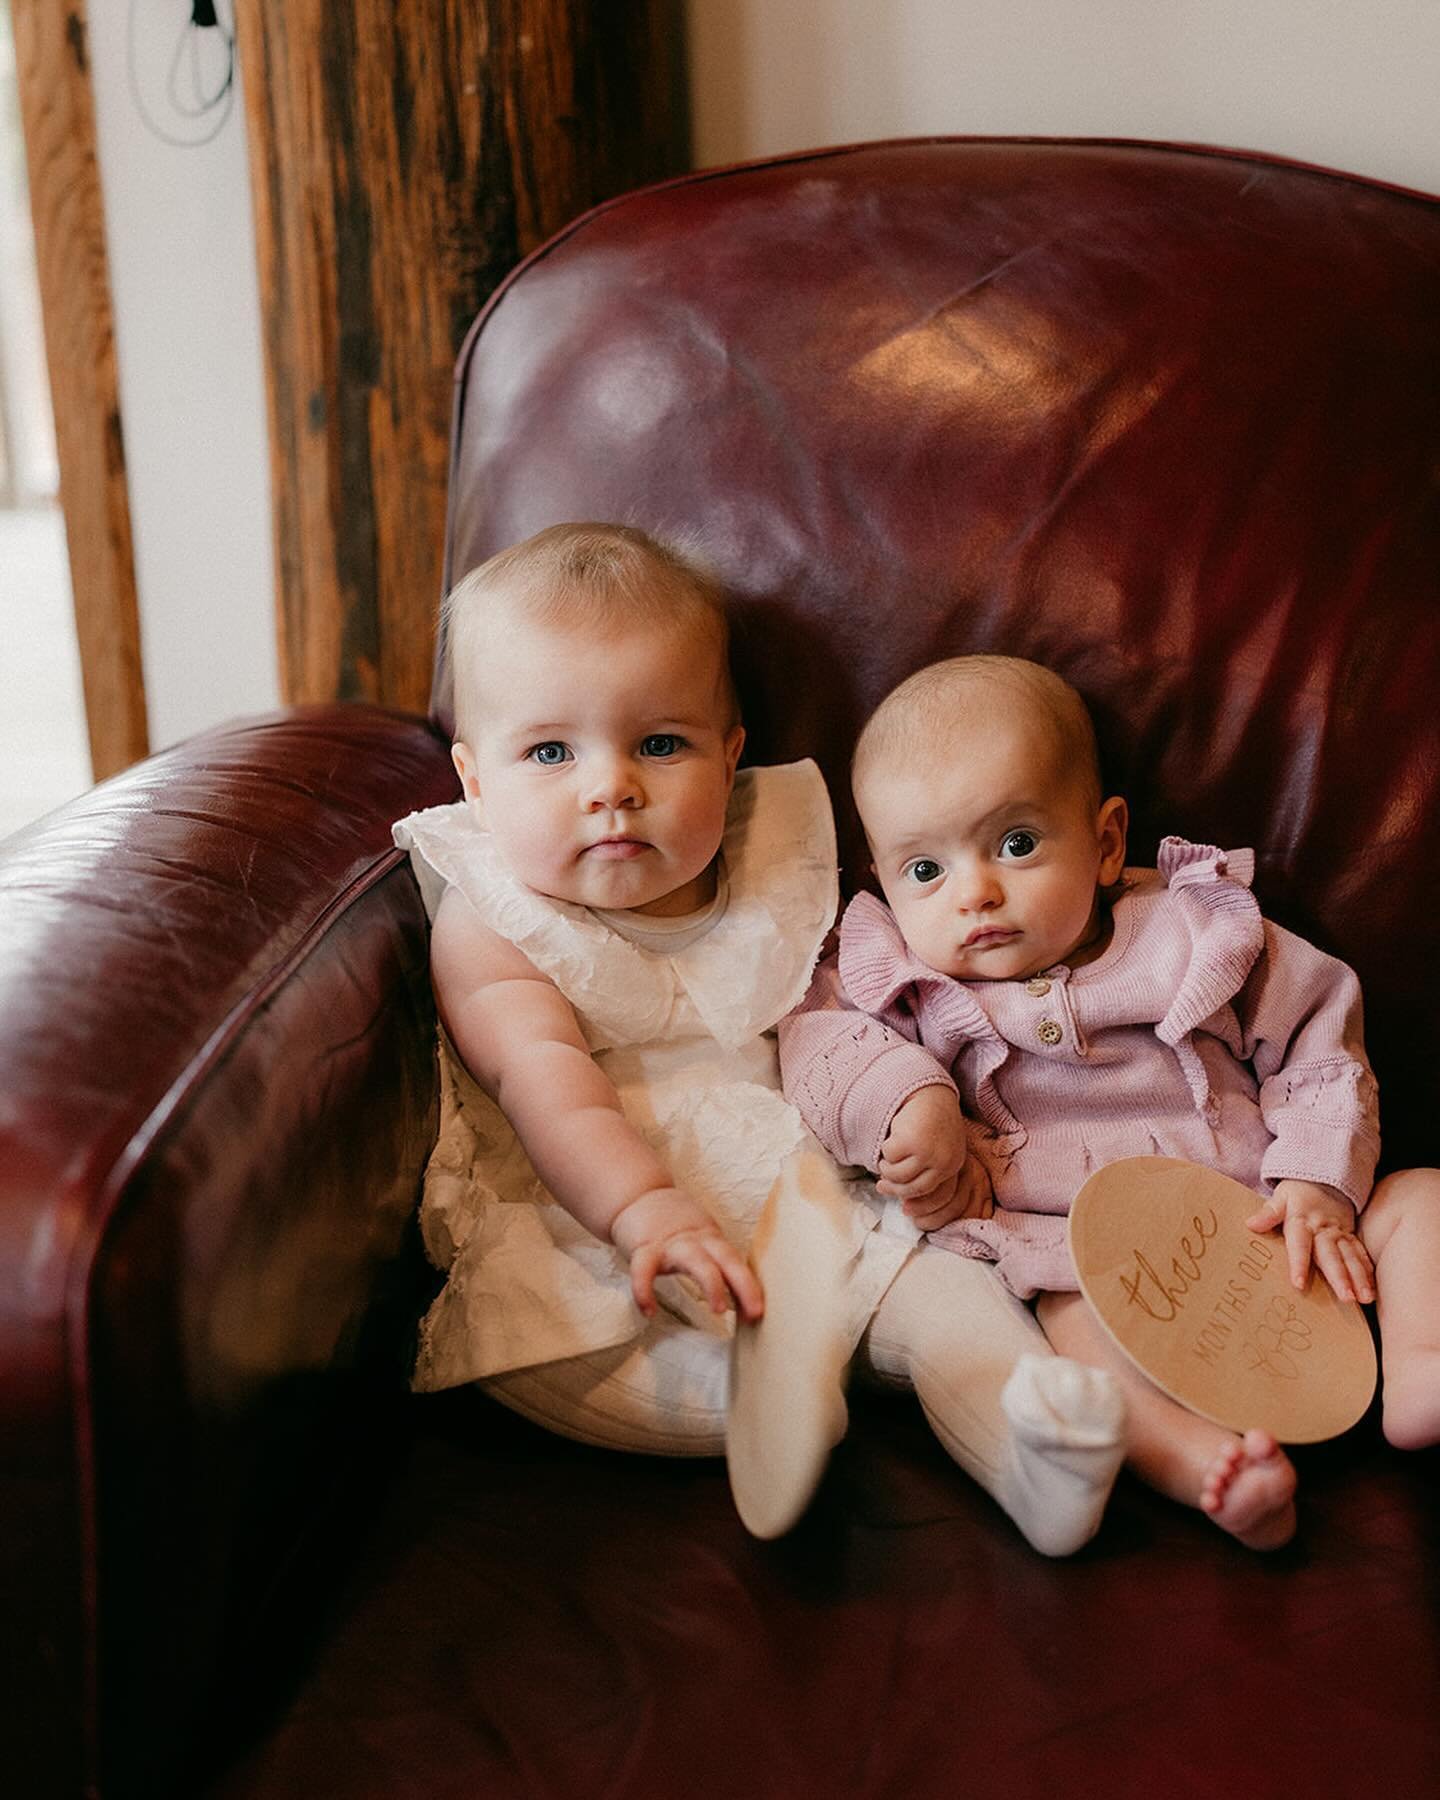 &quot;Can our little ones come?&quot;

You betcha. Bring 'em. Let us gush over their gorgeousness. We sure gushed over Louisa and Sam's daughter and niece. 

Yet another tick for elopements. More time for gushing.